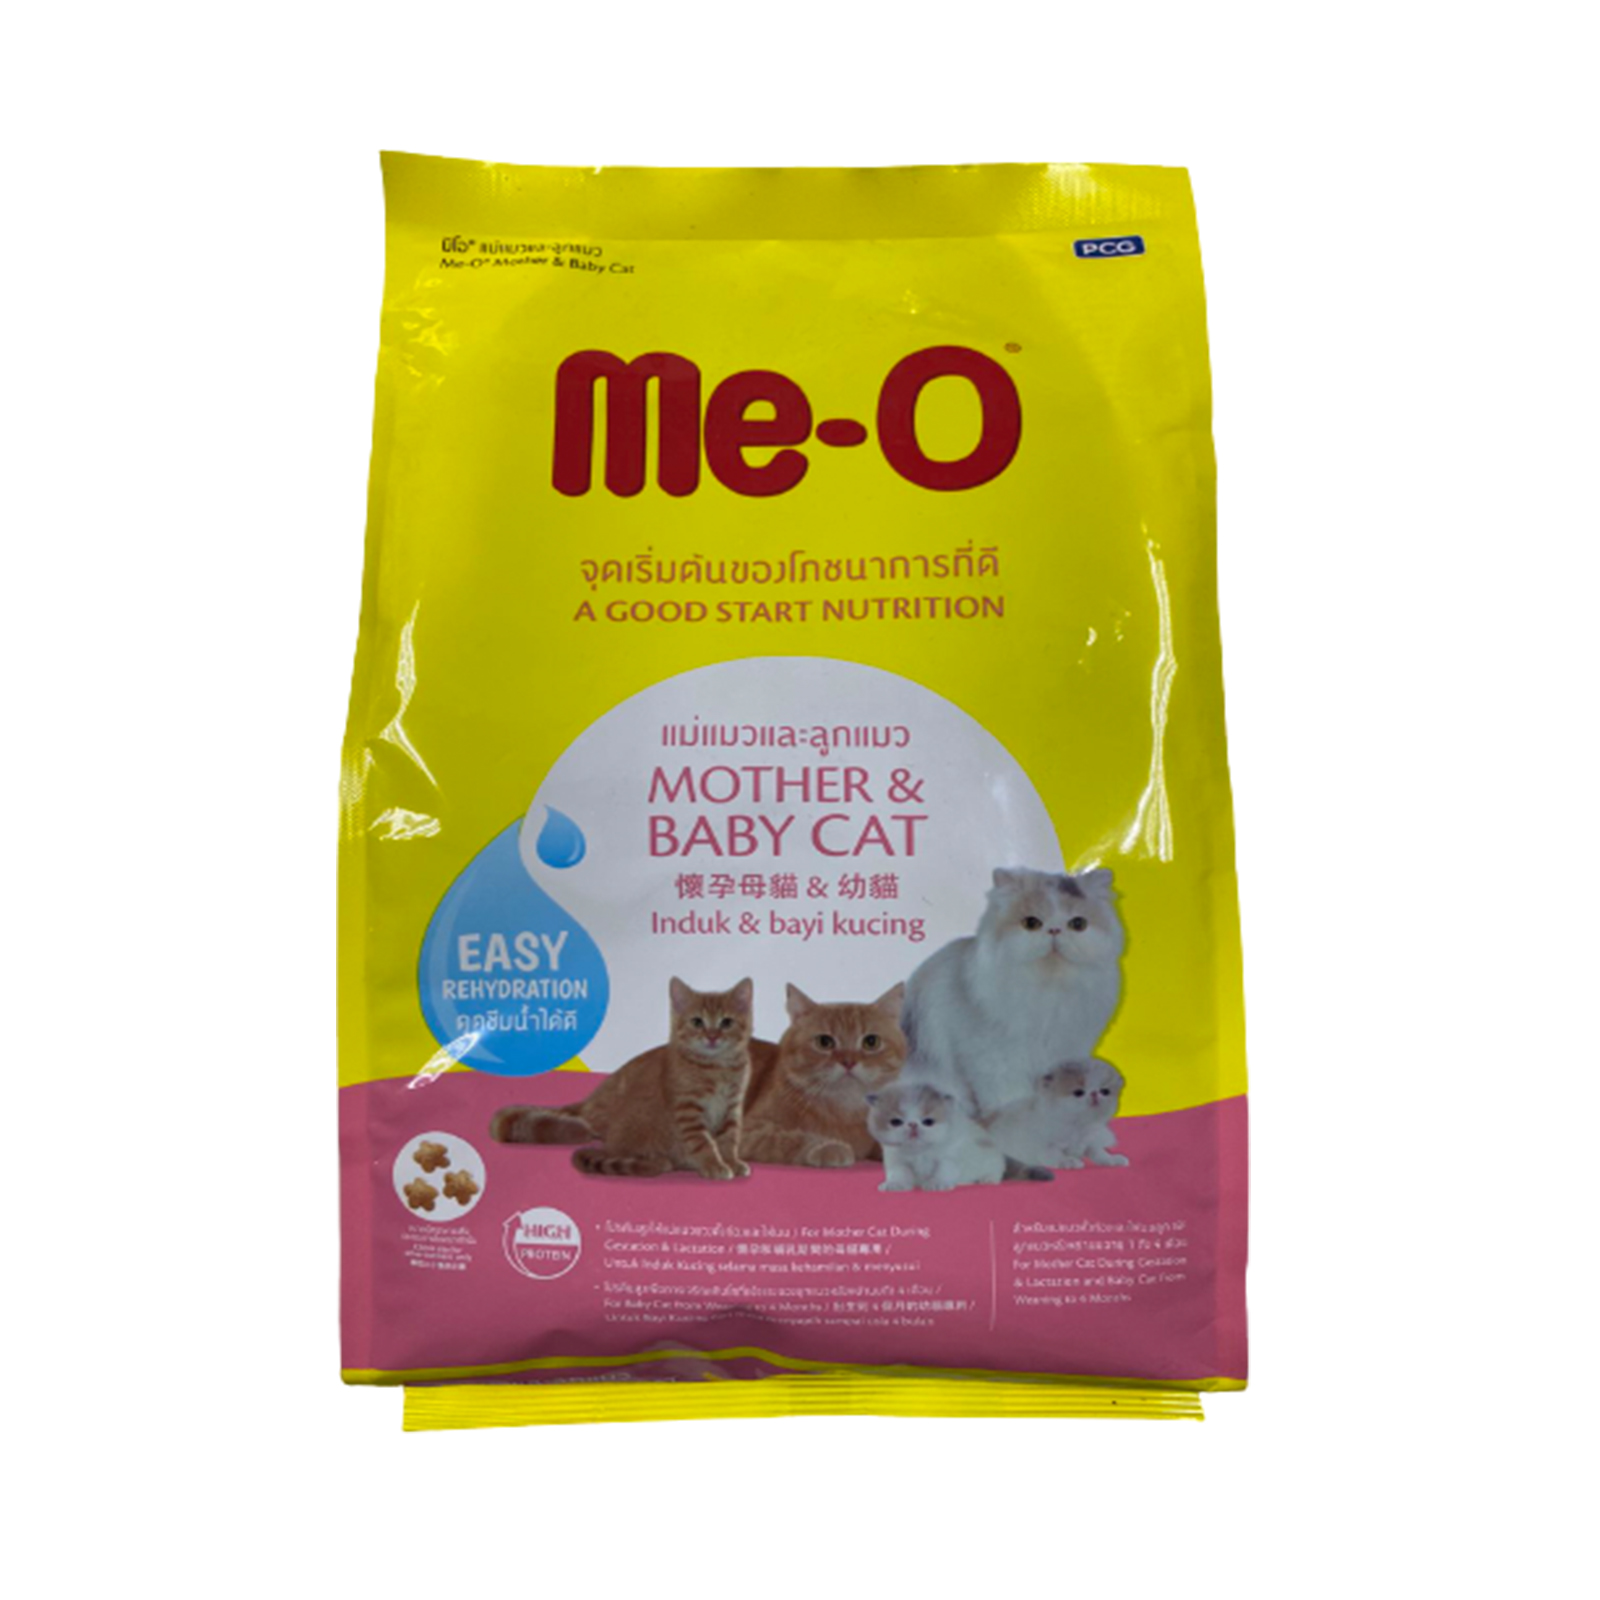 Me-O Mother & Baby Cat Food 1.1kg